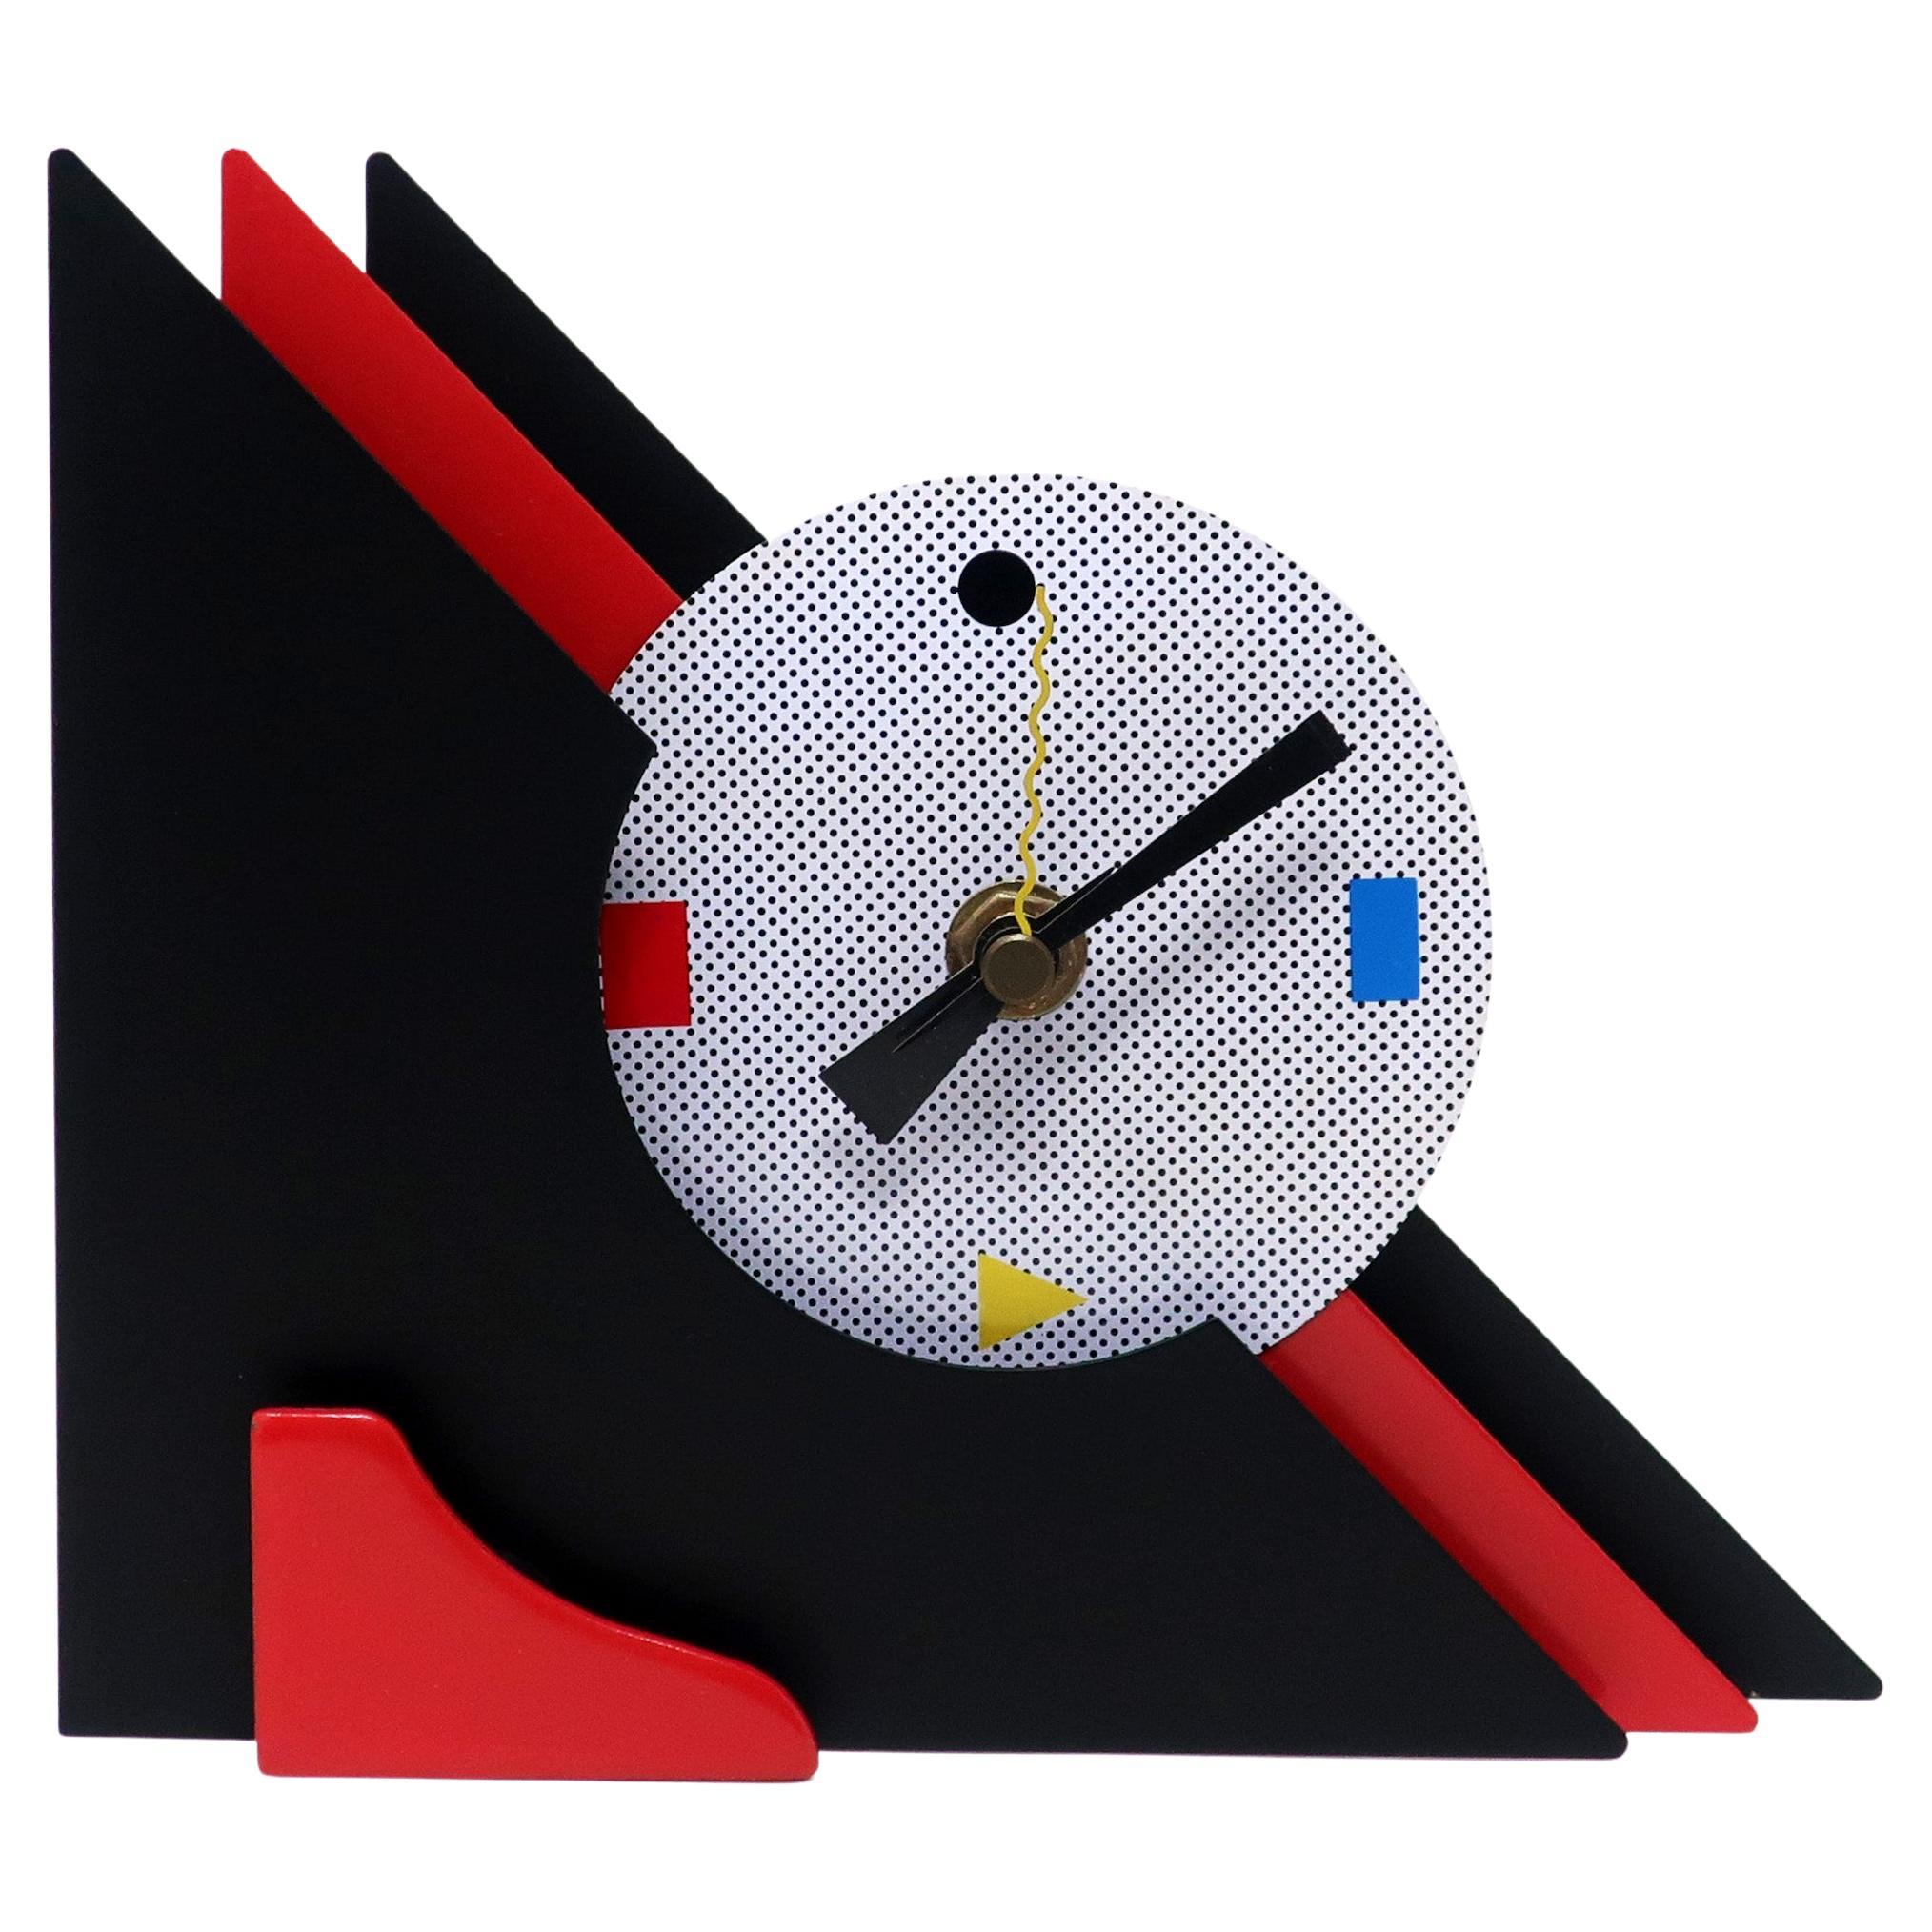 1980s, Red & Black Stacked Desk or Mantel Clock